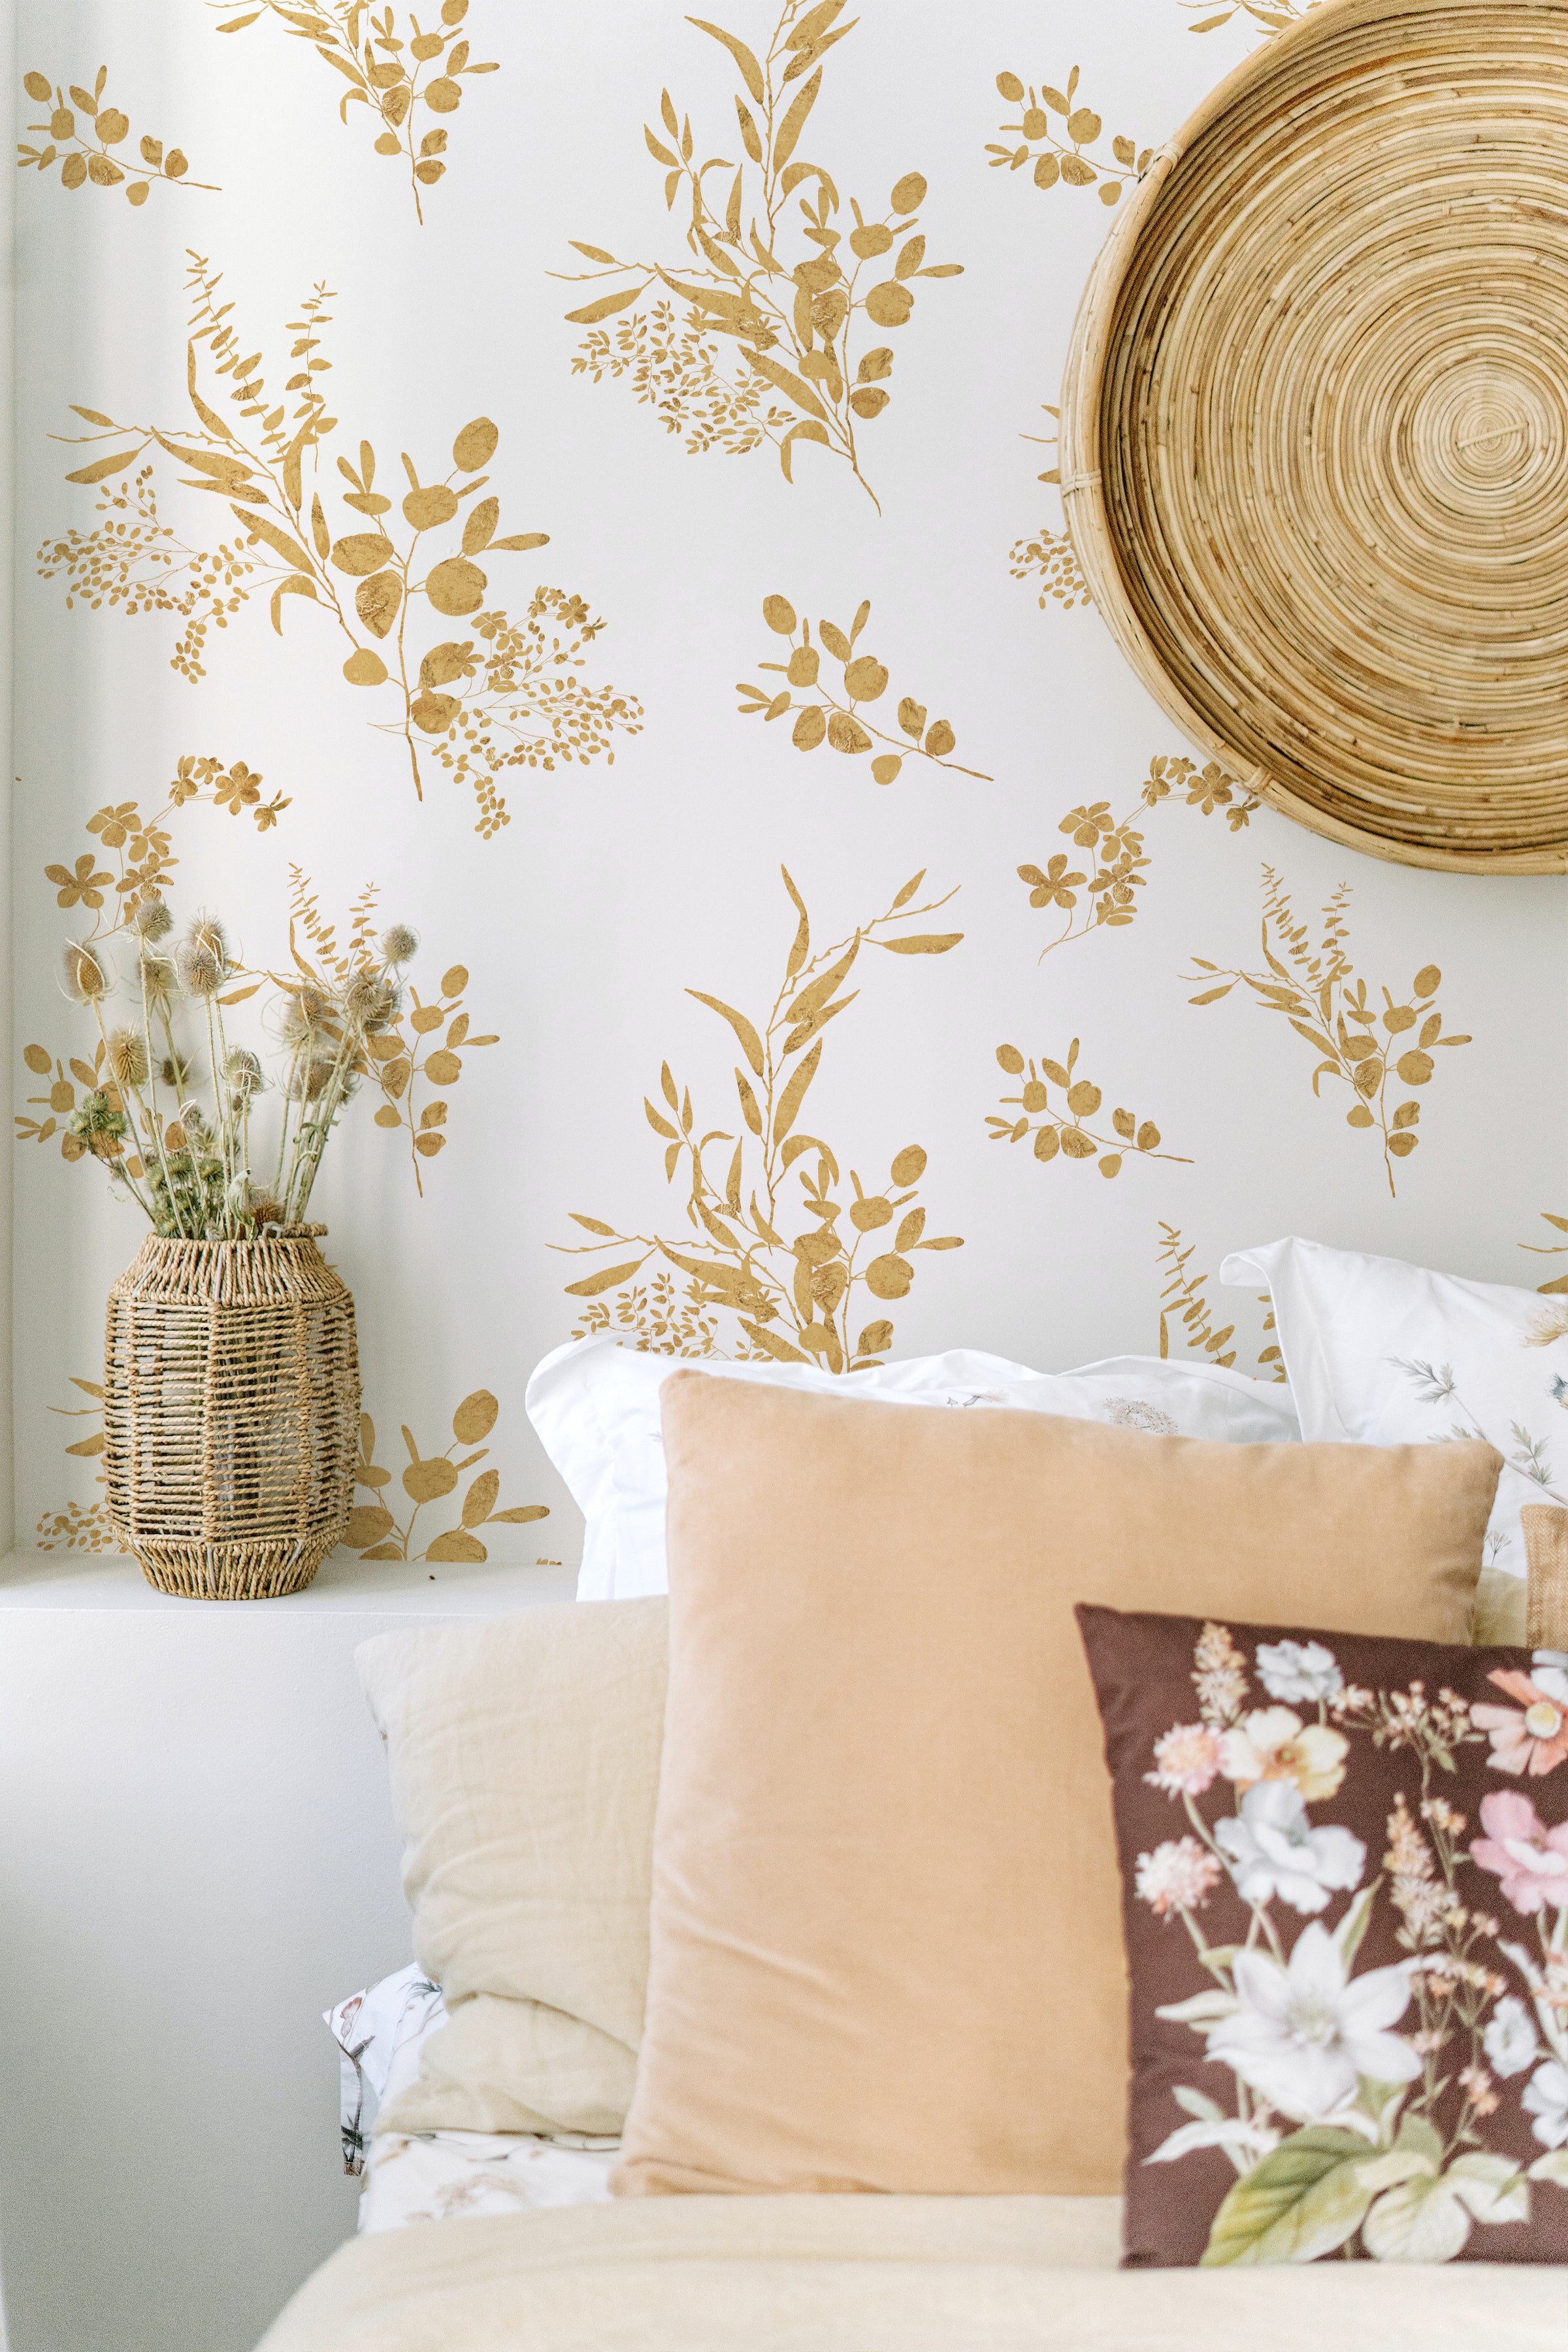 A tranquil corner of a room decorated with Golden Greenery Wallpaper, paired with a wicker basket holding dried flowers and a bamboo mat rolled up against the wall, enhancing the room’s organic and peaceful feel.